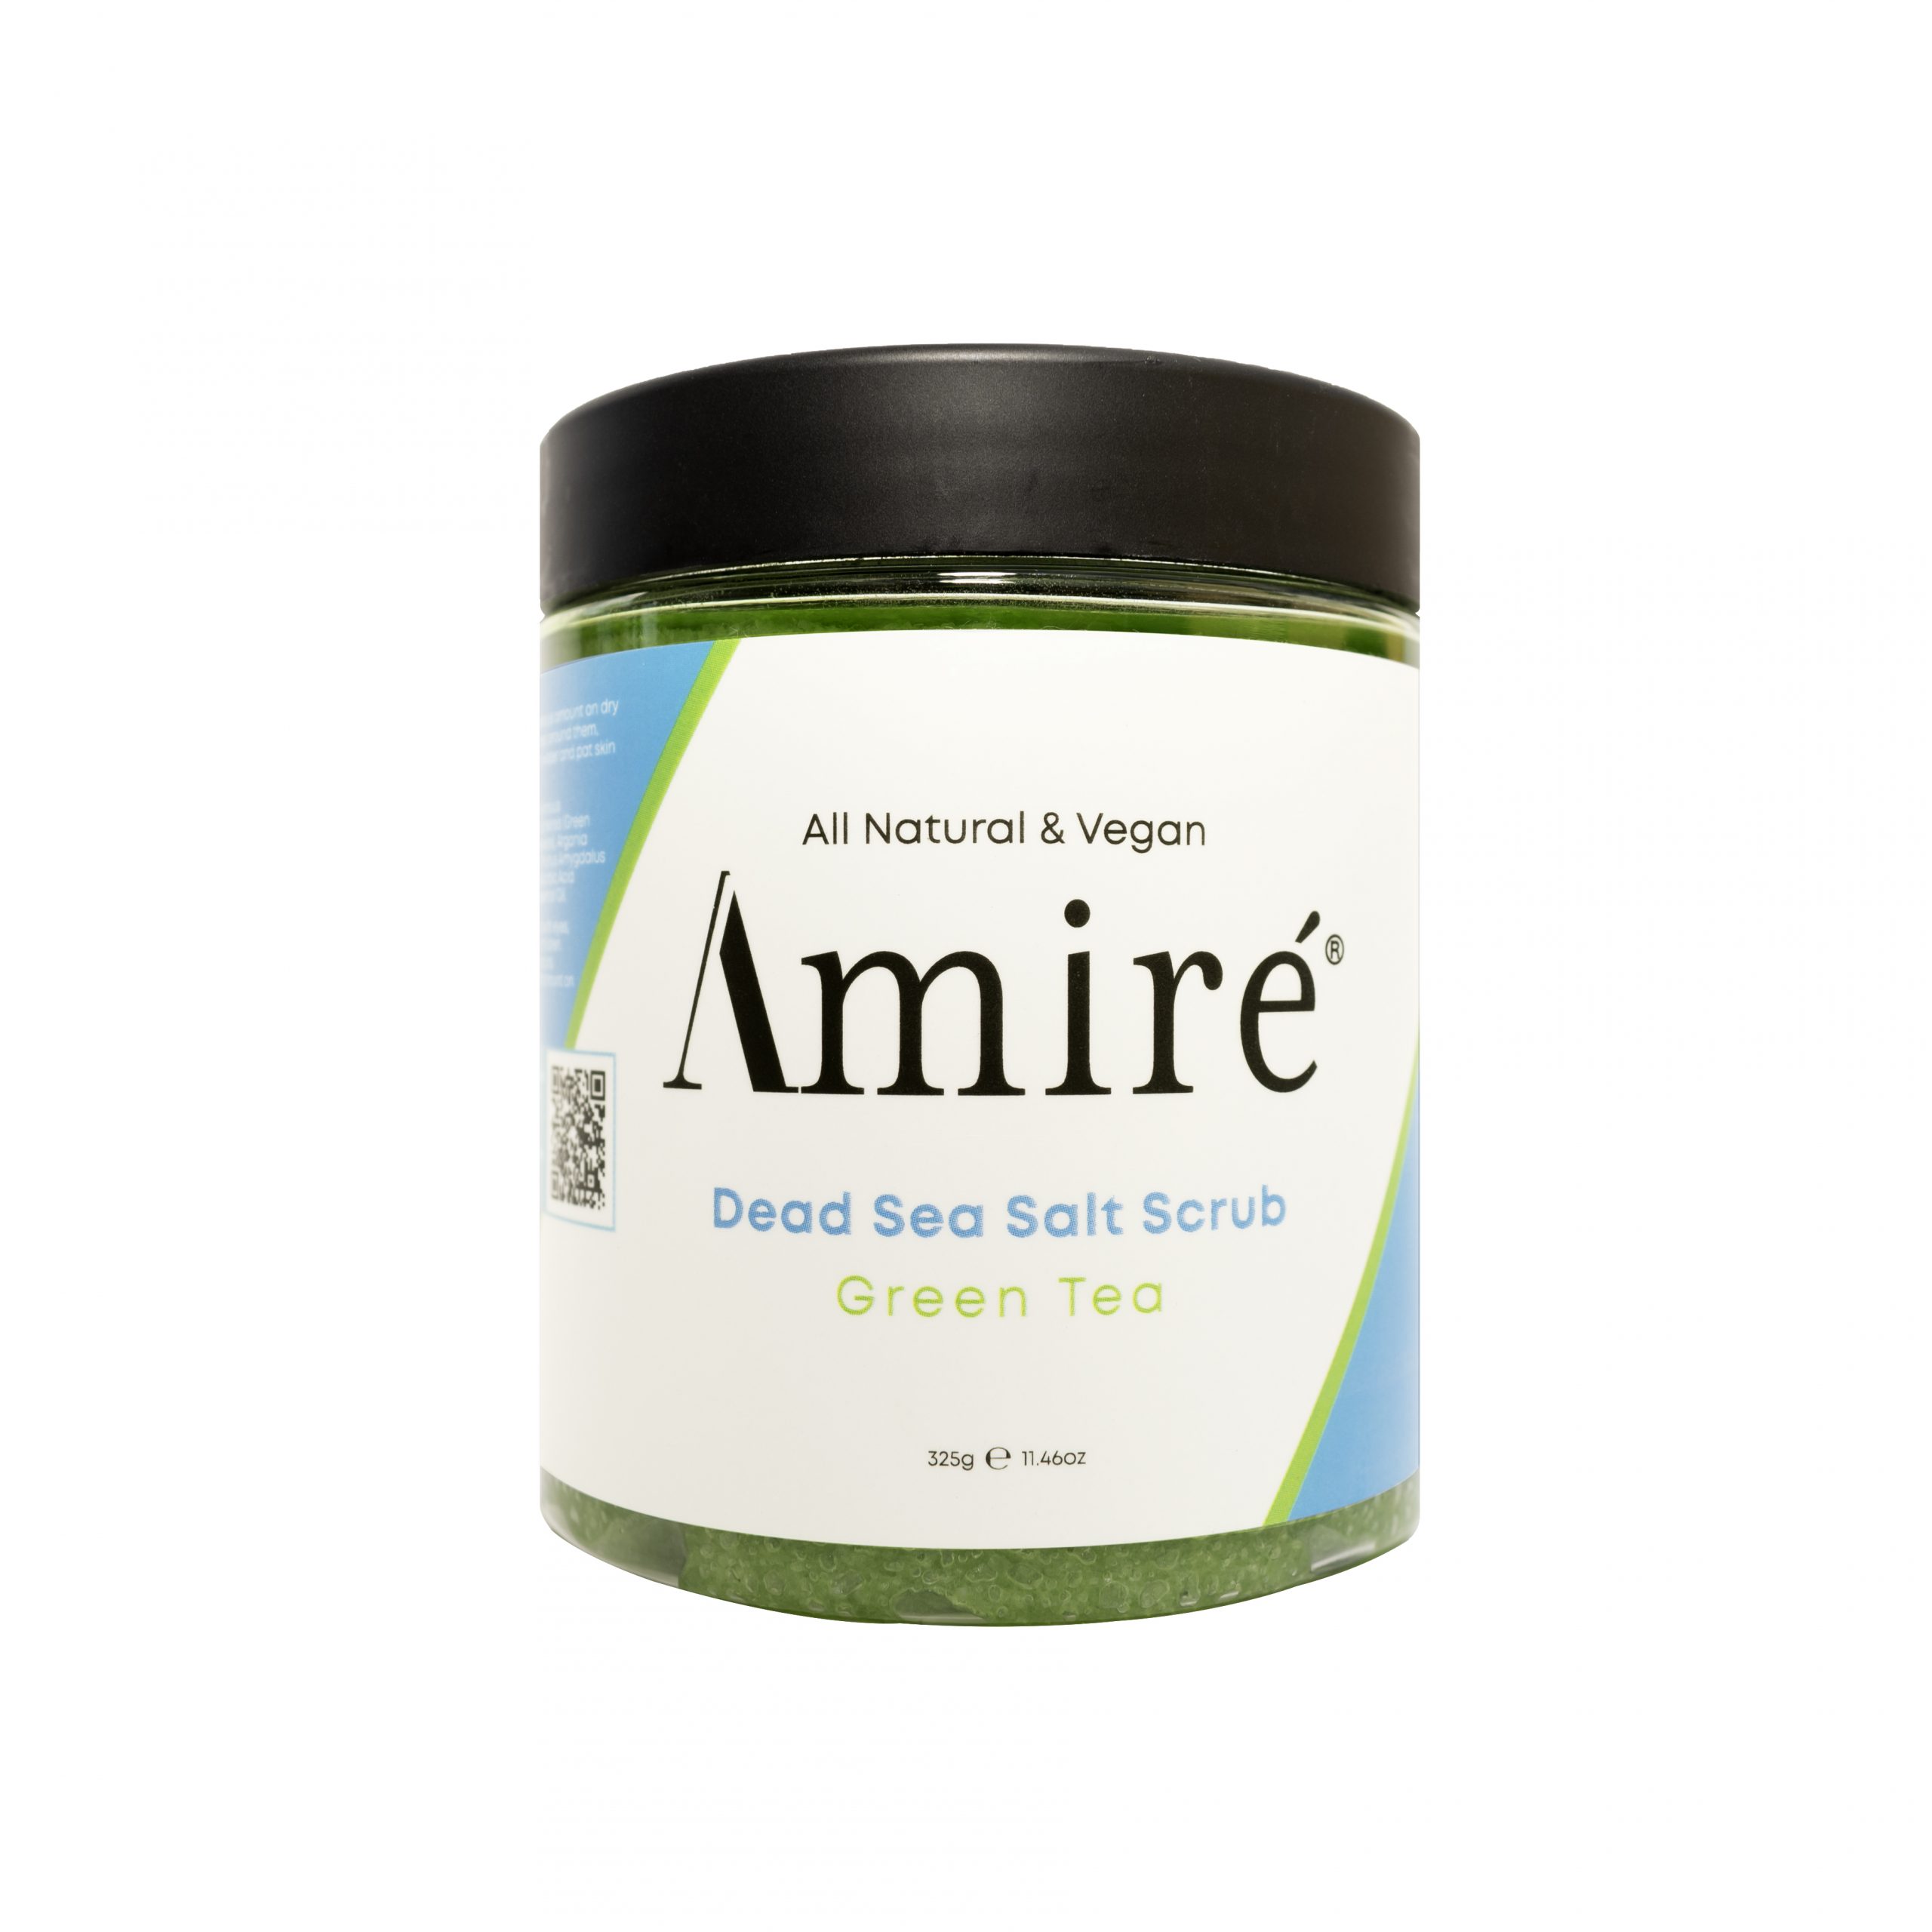 https://www.momjunction.com/wp-content/uploads/product-images/amire-tea-tree-oil-exfoliating-body-and-foot-scrub-with-dead-sea-salt_afl33.jpg